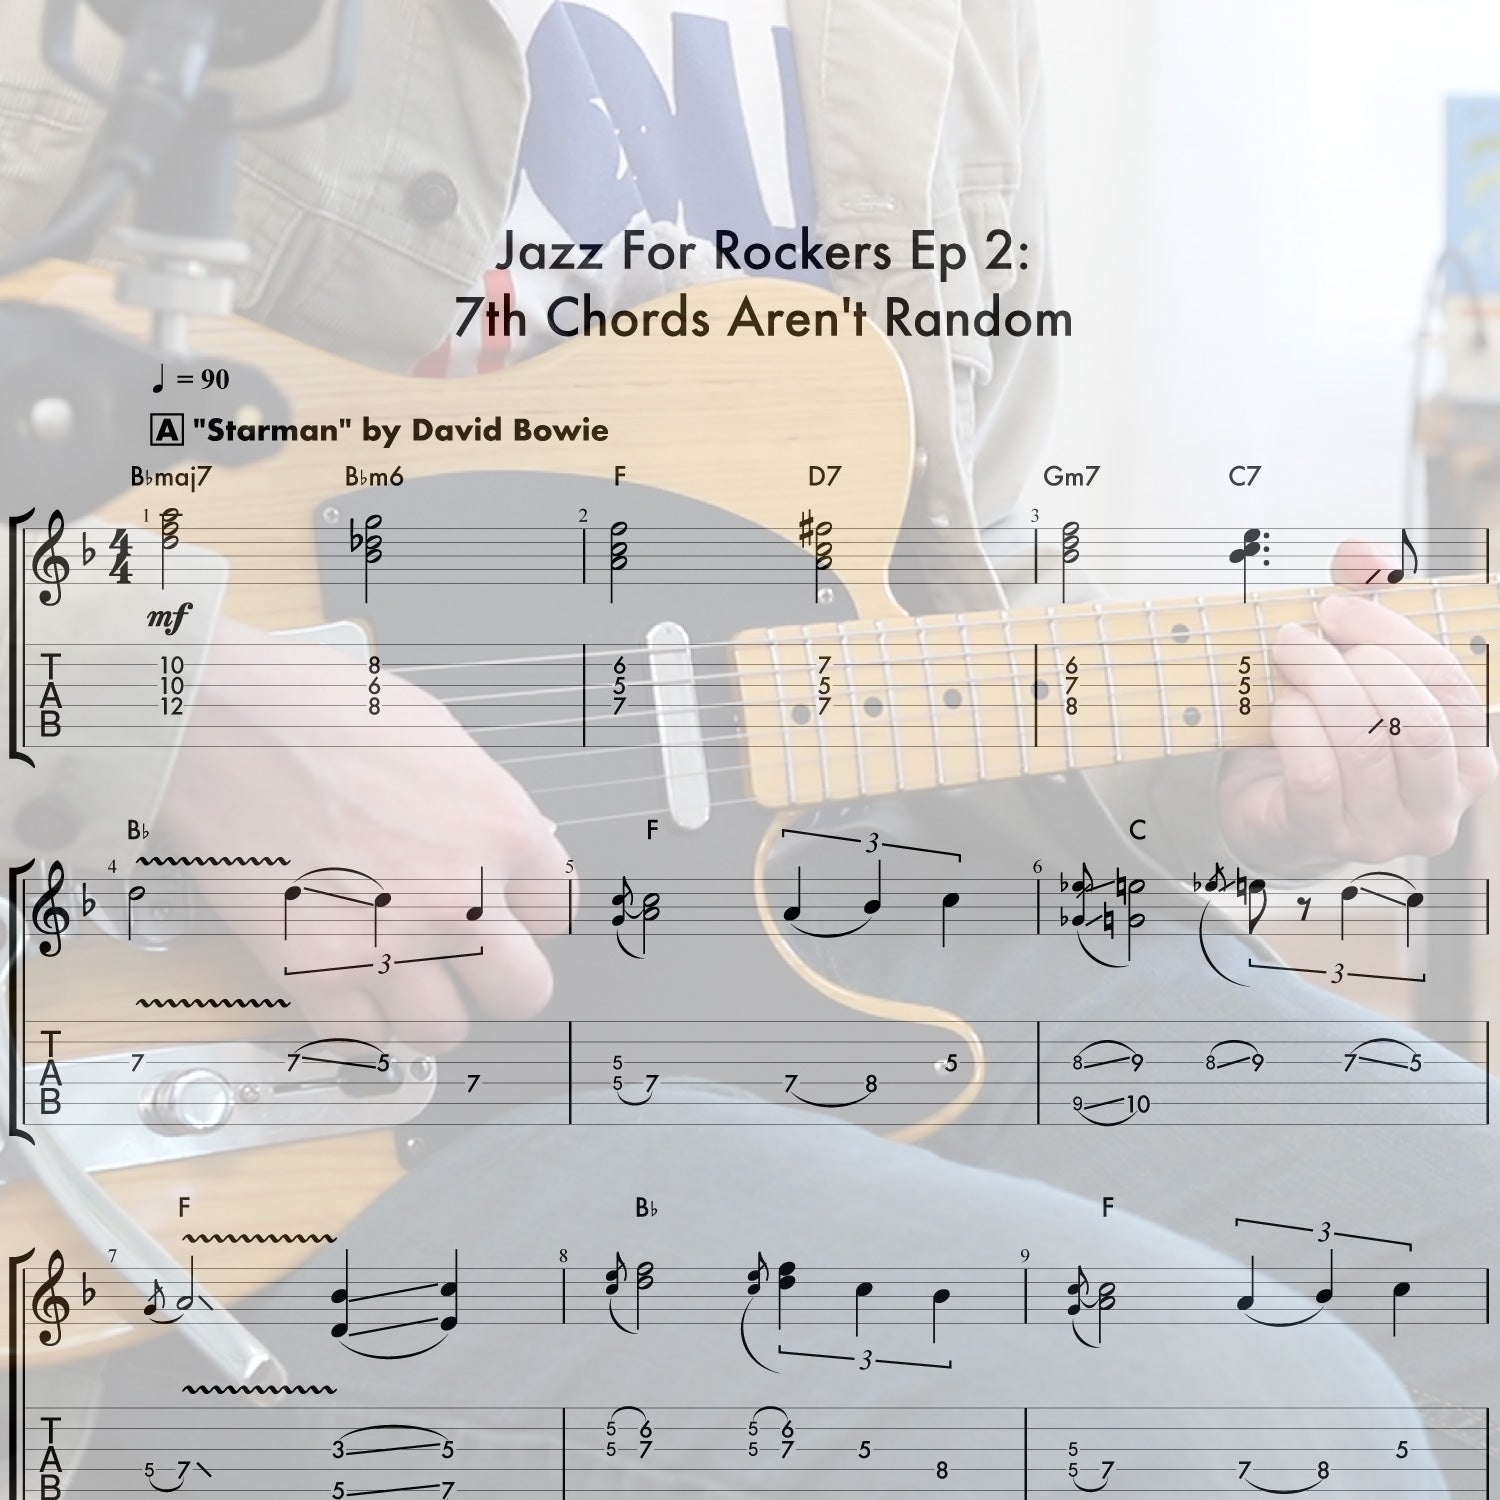 Jazz For Rockers ep 2: 7th Chords Aren't Random